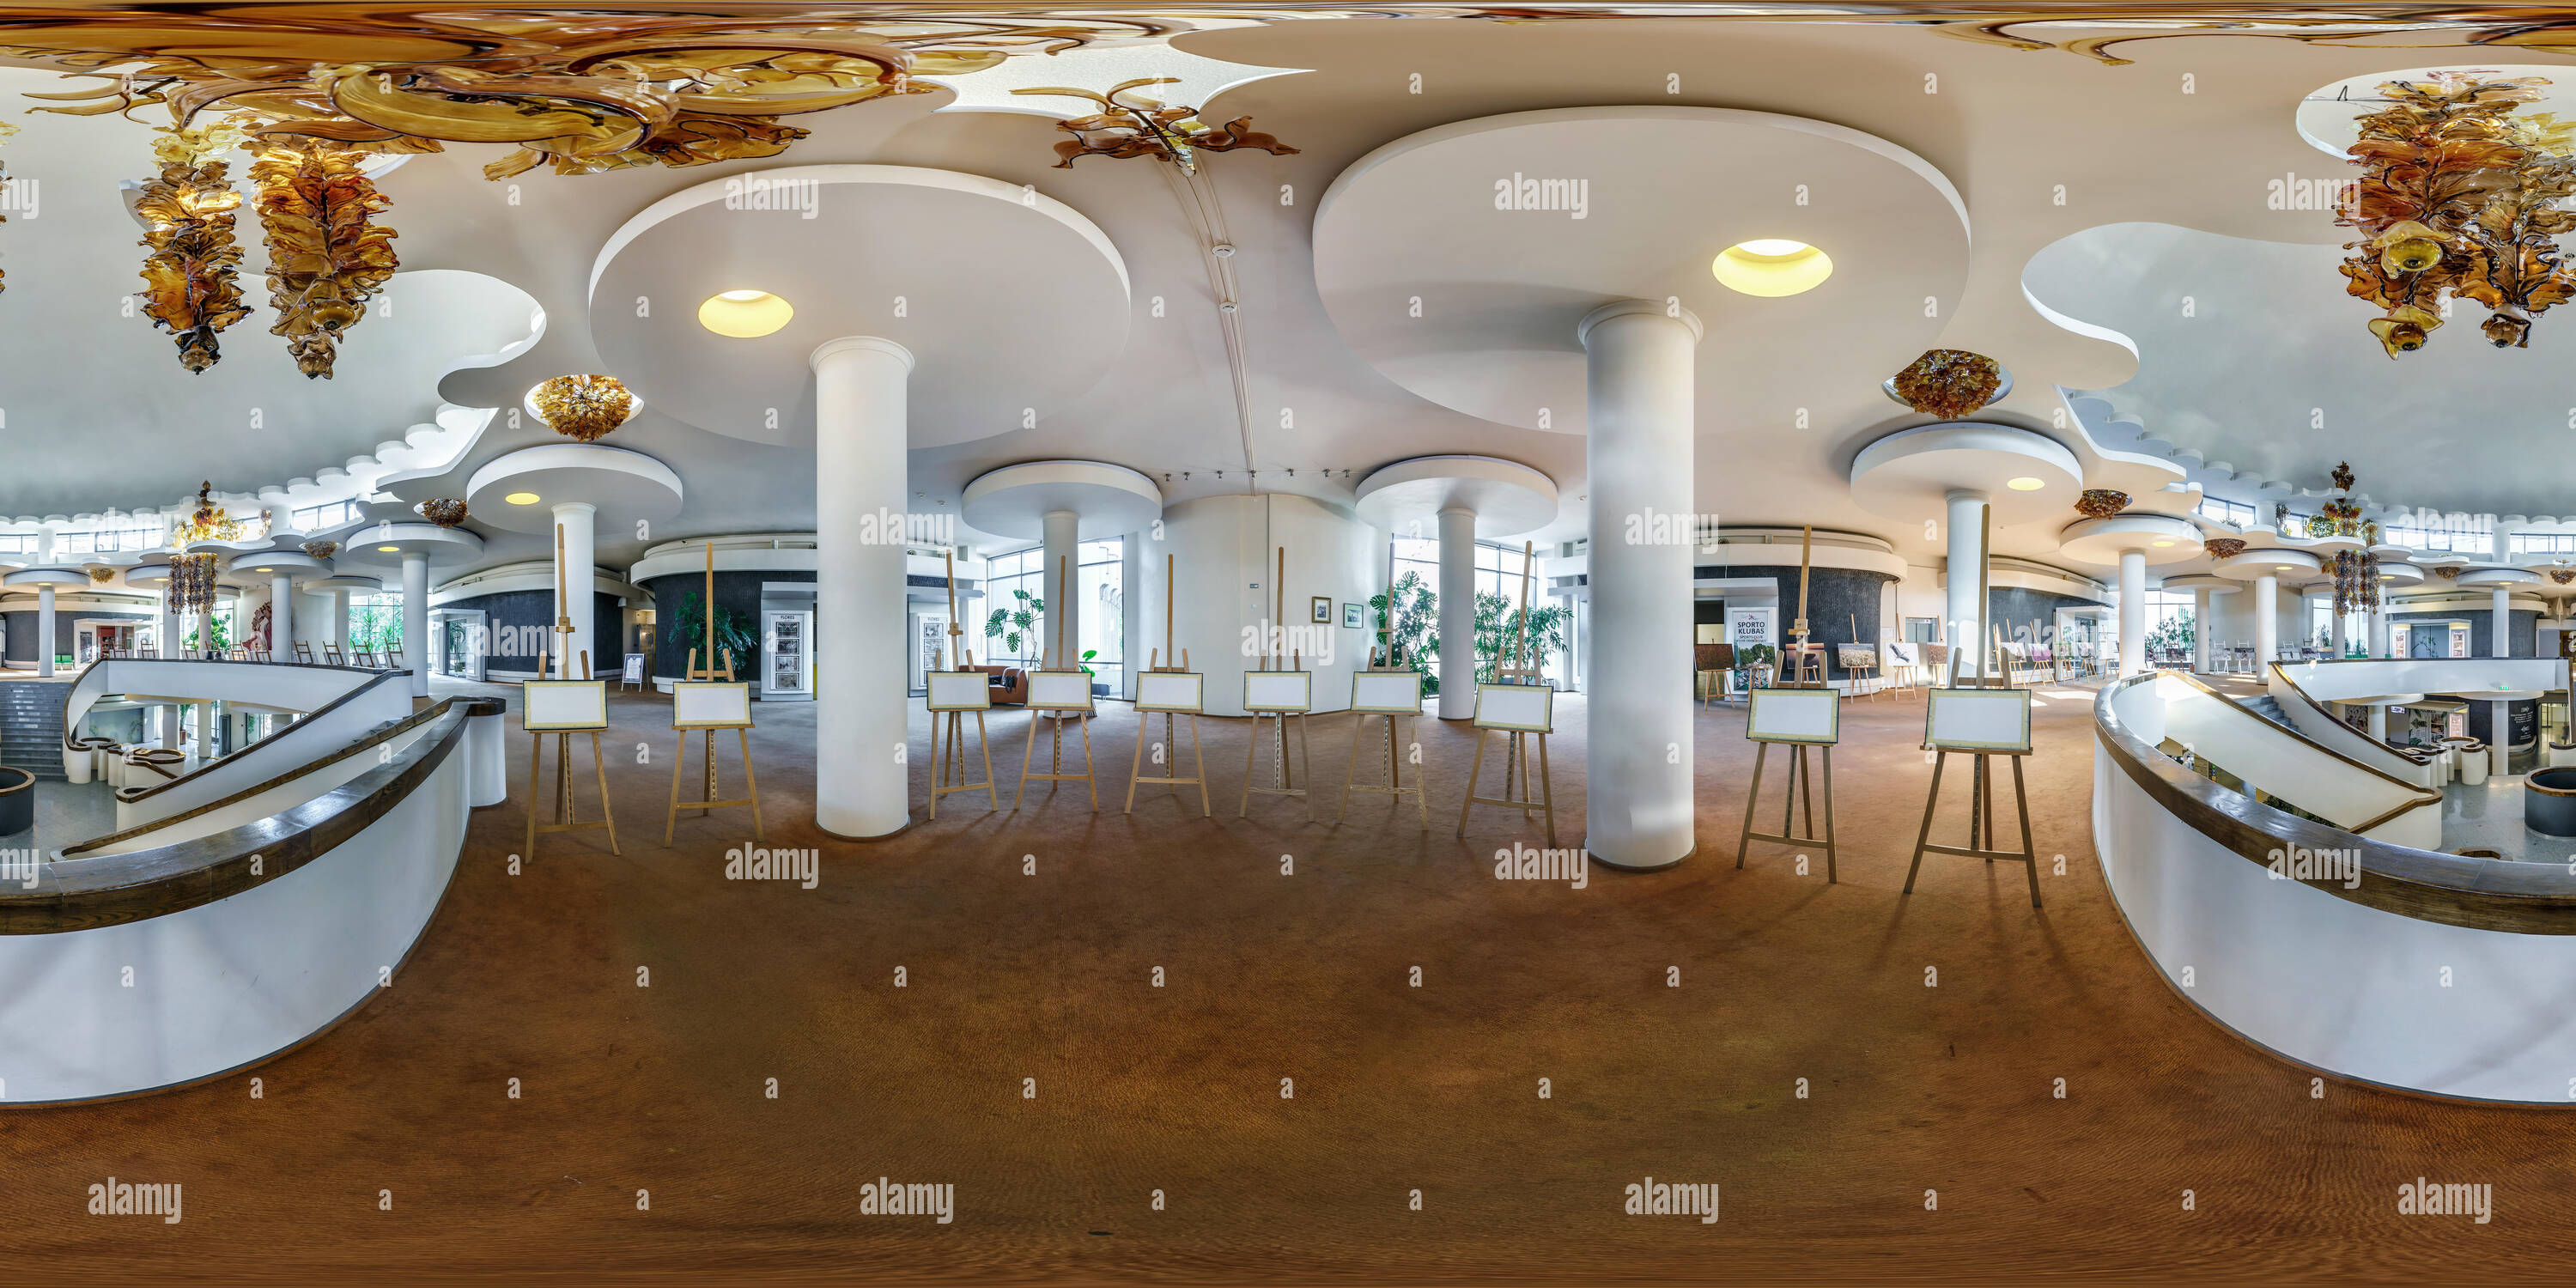 360 degree panoramic view of DRUSKENINKAI, Lithuania - AUGUST 2019: Full spherical seamless hdri panorama 360 degrees inside interior of room with empty easels in equirectangular